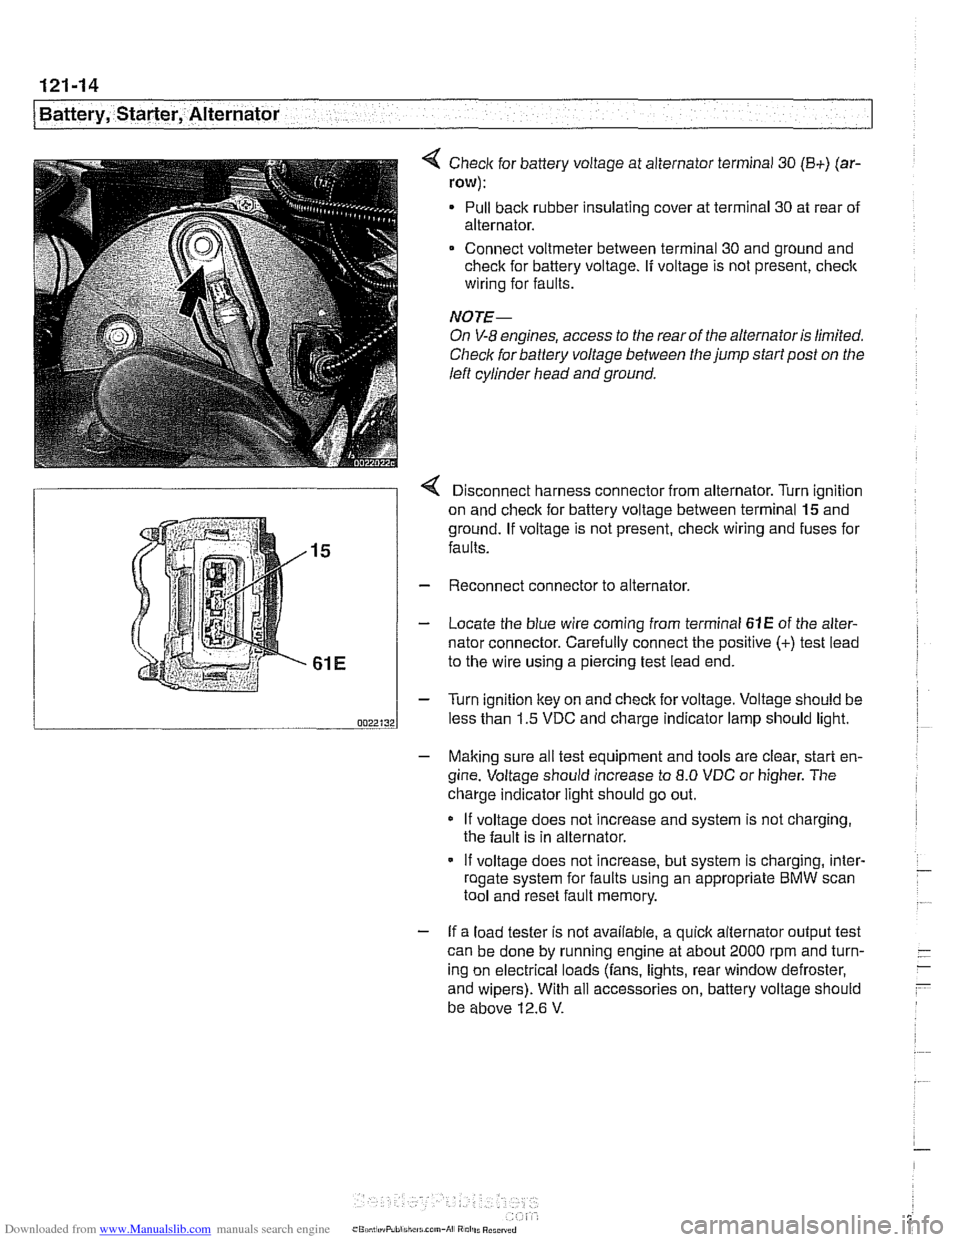 BMW 528i 1998 E39 Workshop Manual Downloaded from www.Manualslib.com manuals search engine 
- - 
/Battery, Starter,  Alternator -- - -. - --I 
< Check for battery  voltage  at alternator  terminal 30 (B+) (ar- 
row): 
Pull back rubber